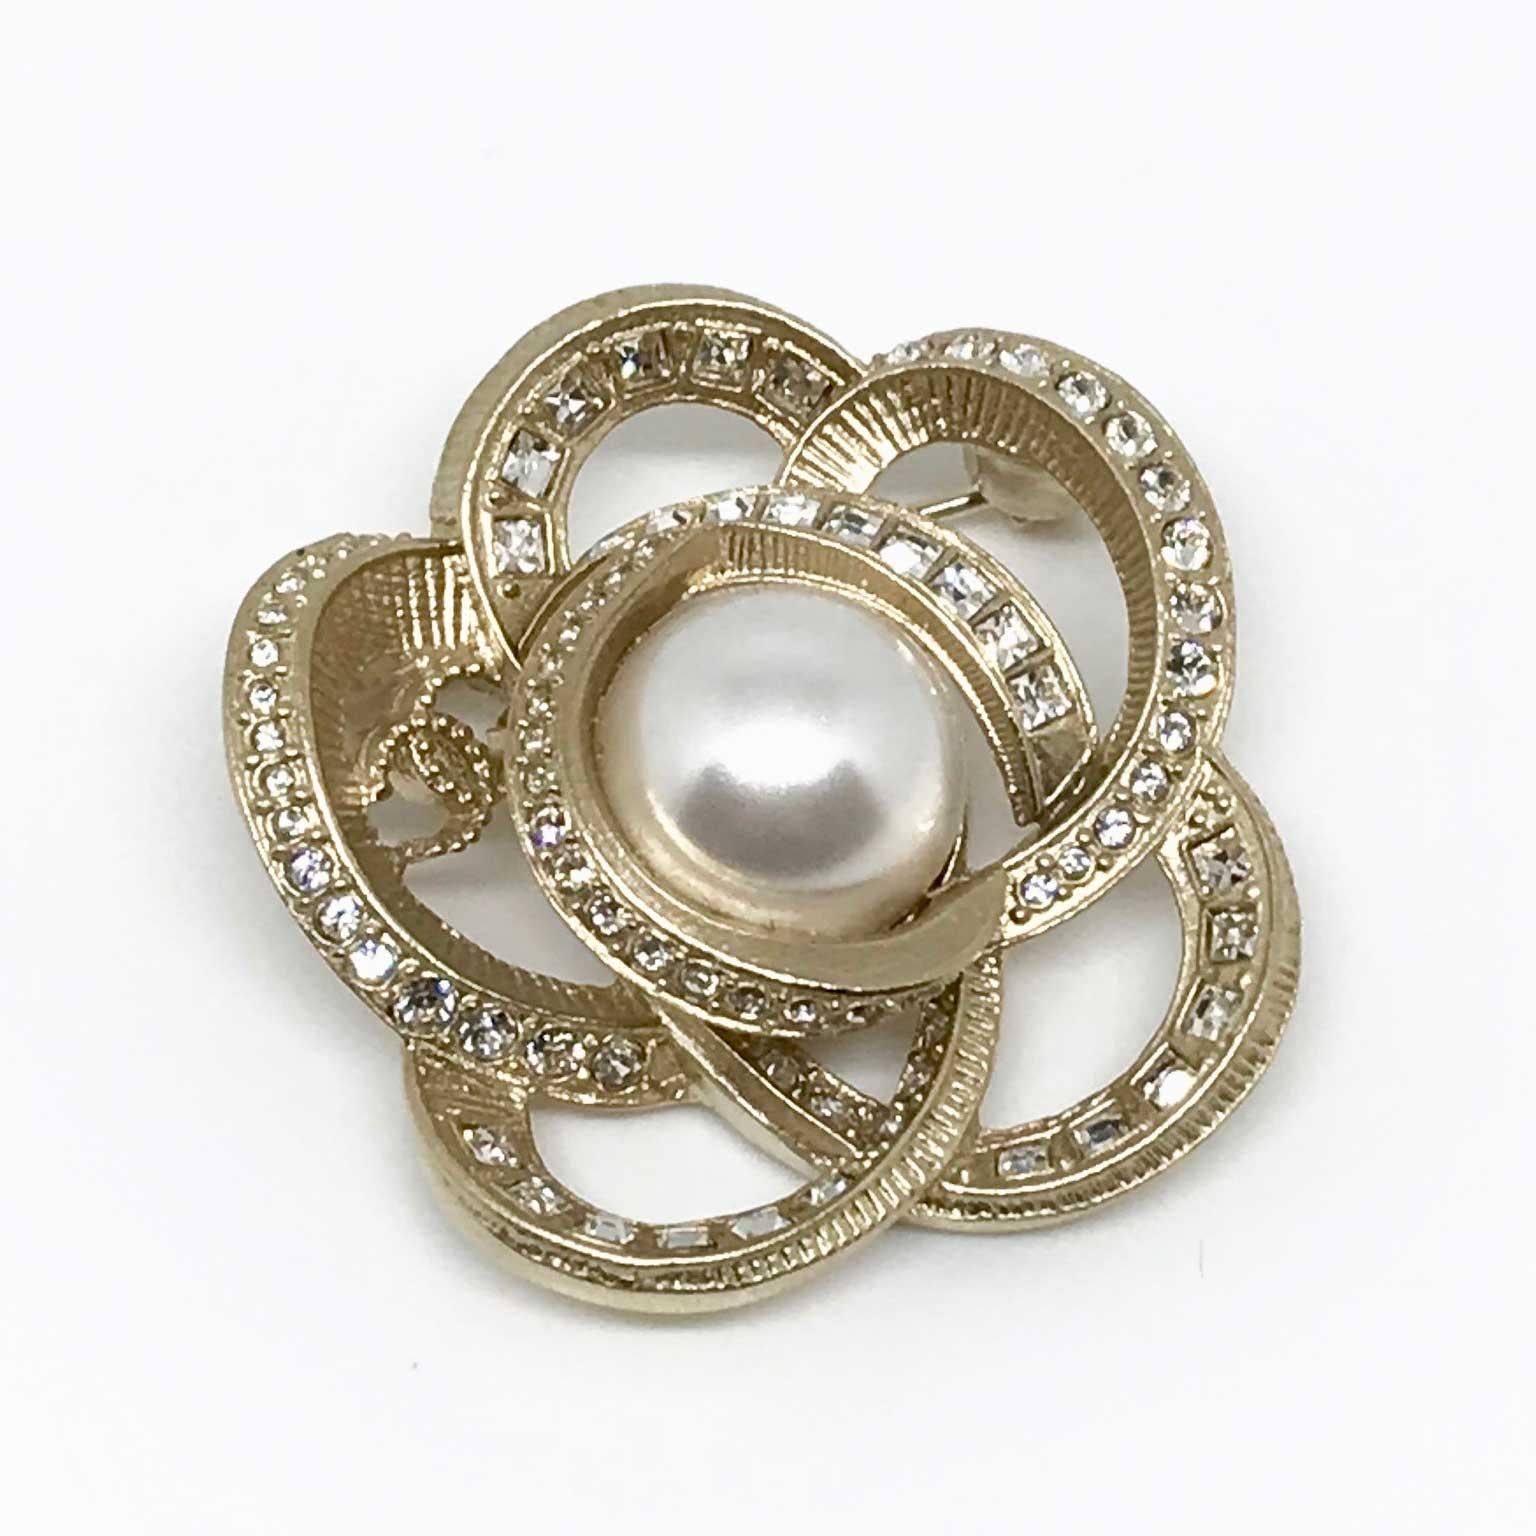 Superb Chanel brooch from the Spring / Summer 2018 Collection. It is in the shape of a flower entirely set with rhinestones, a golden CC is in the heart of a petal. The flower bud is a pearly pearl.
This Chanel flower brooch measures 4.3 cm in